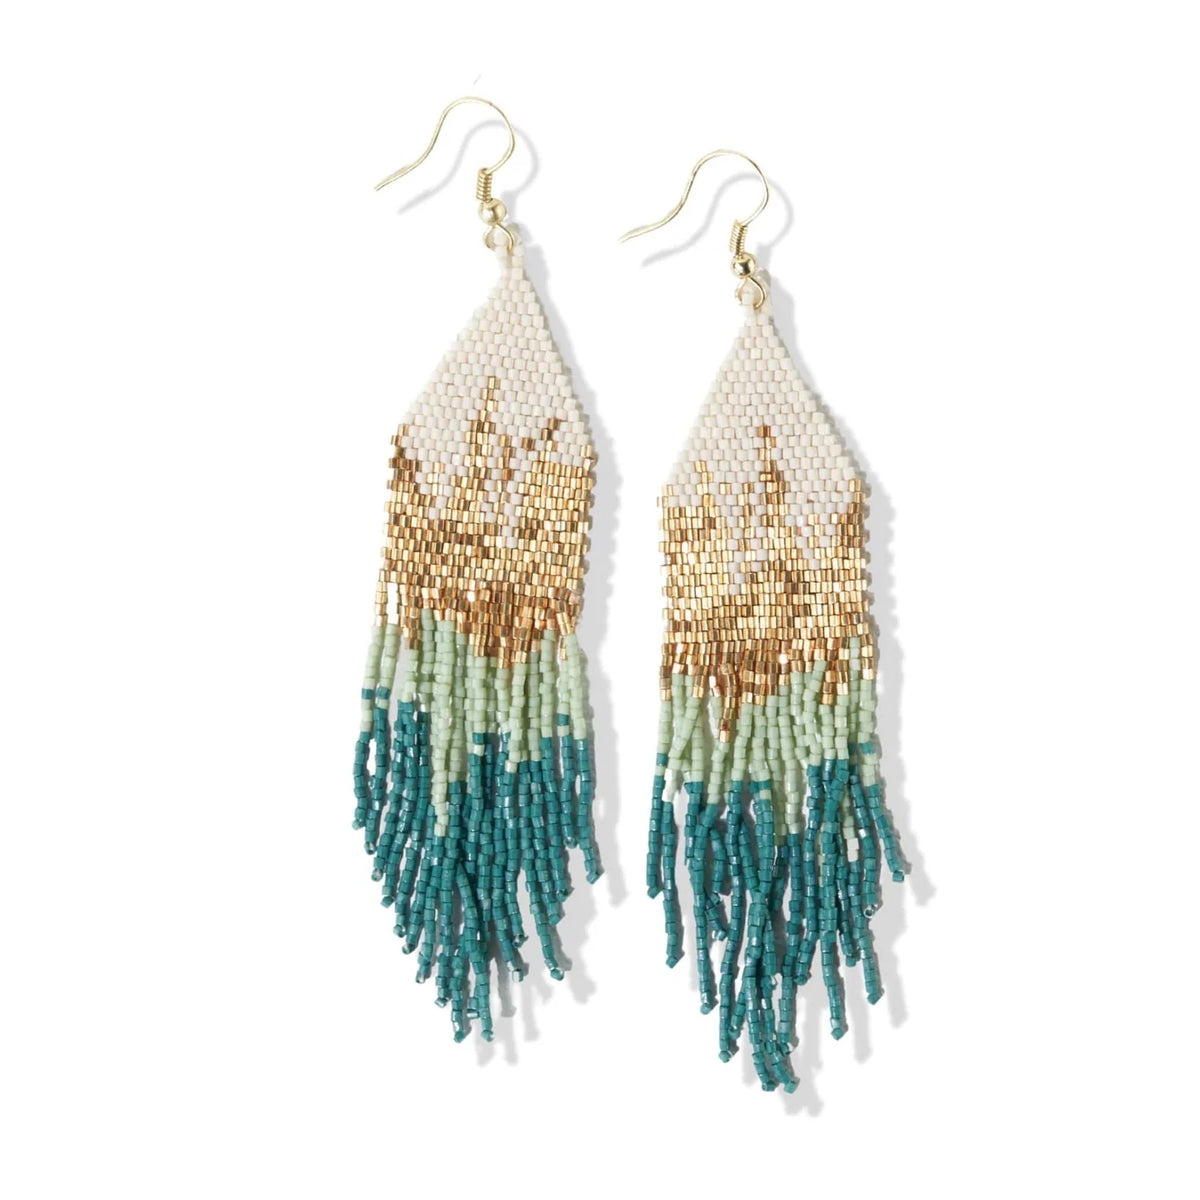 Claire Ombre Beaded Fringe Earrings - MINT